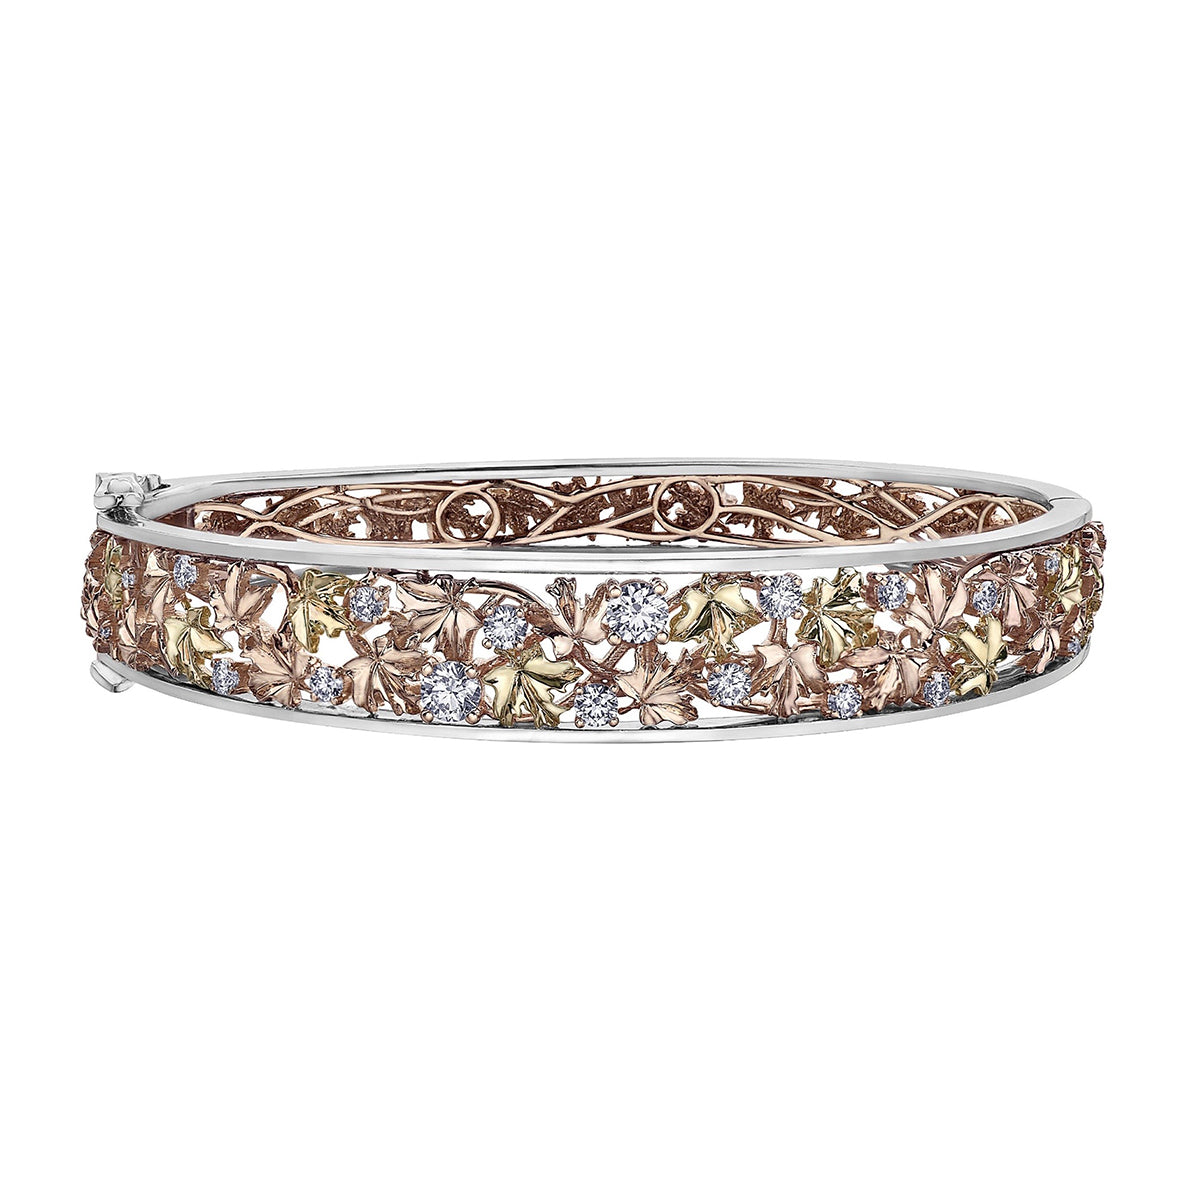 Crafted in 14KT rose, white and yellow Certified Canadian Gold, this bracelet features maple leafs and round brilliant-cut Canadian diamonds.